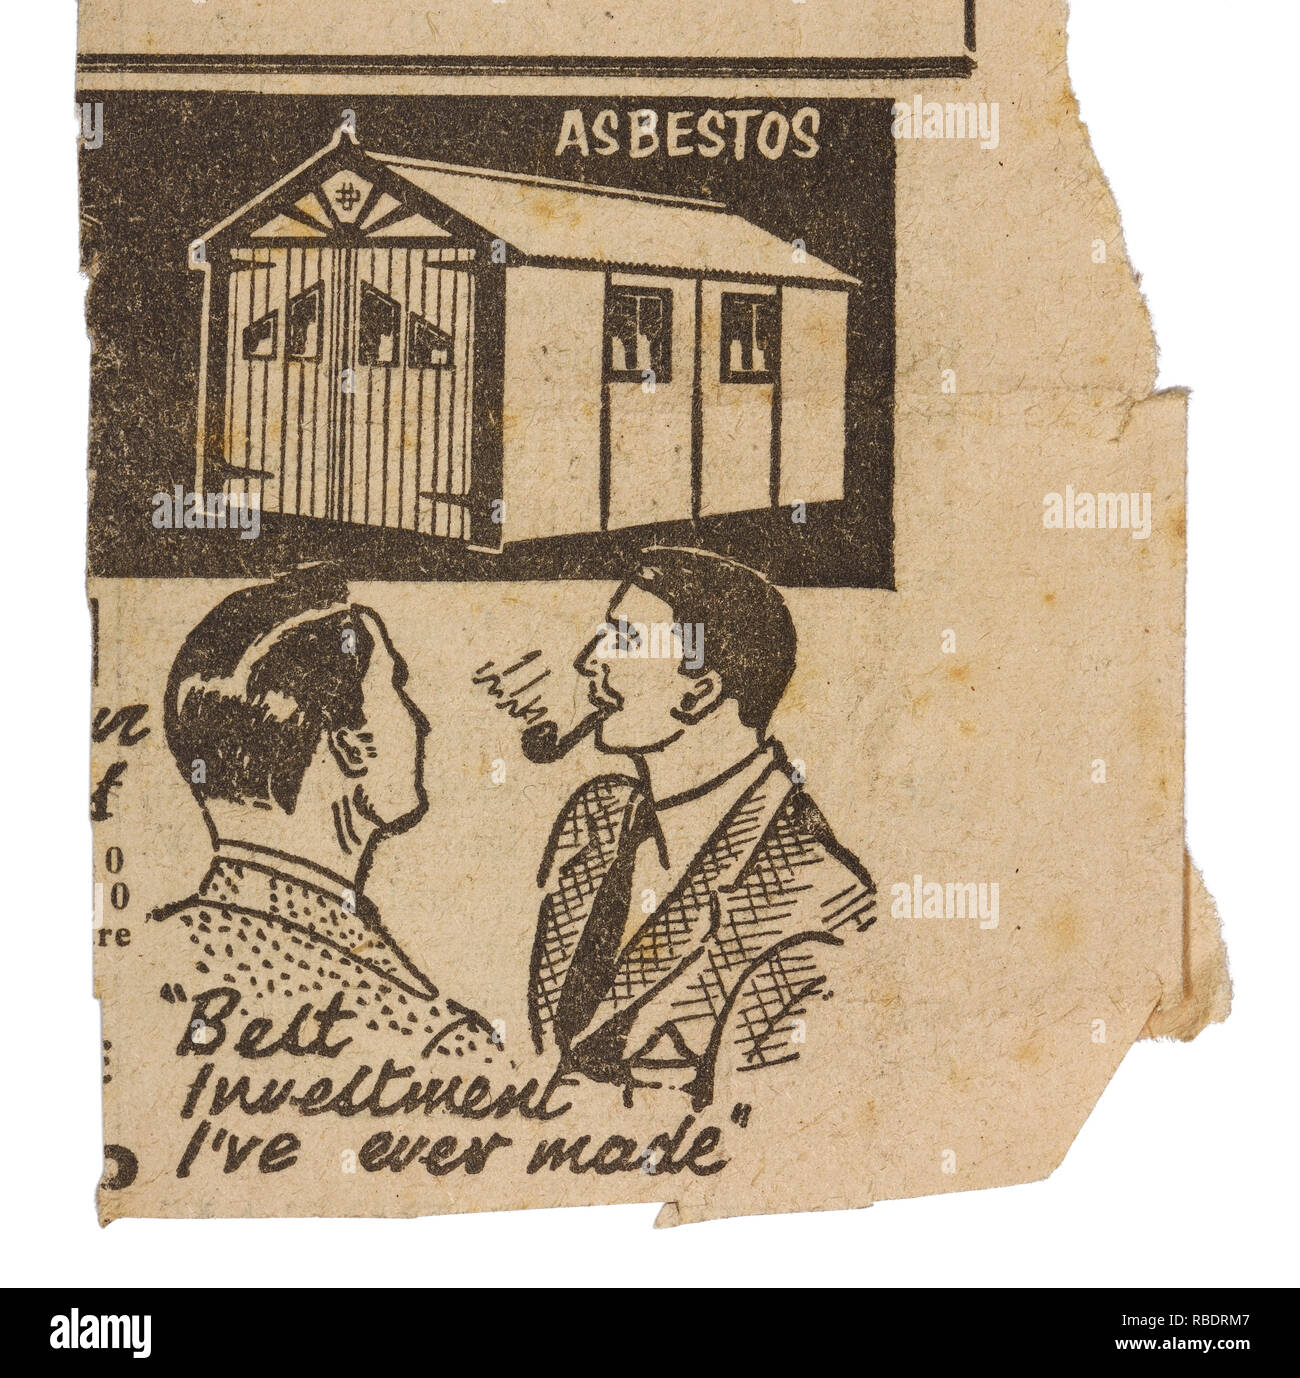 A vintage newspaper advertisement from 1963 for a domestic garage built from asbestos Stock Photo